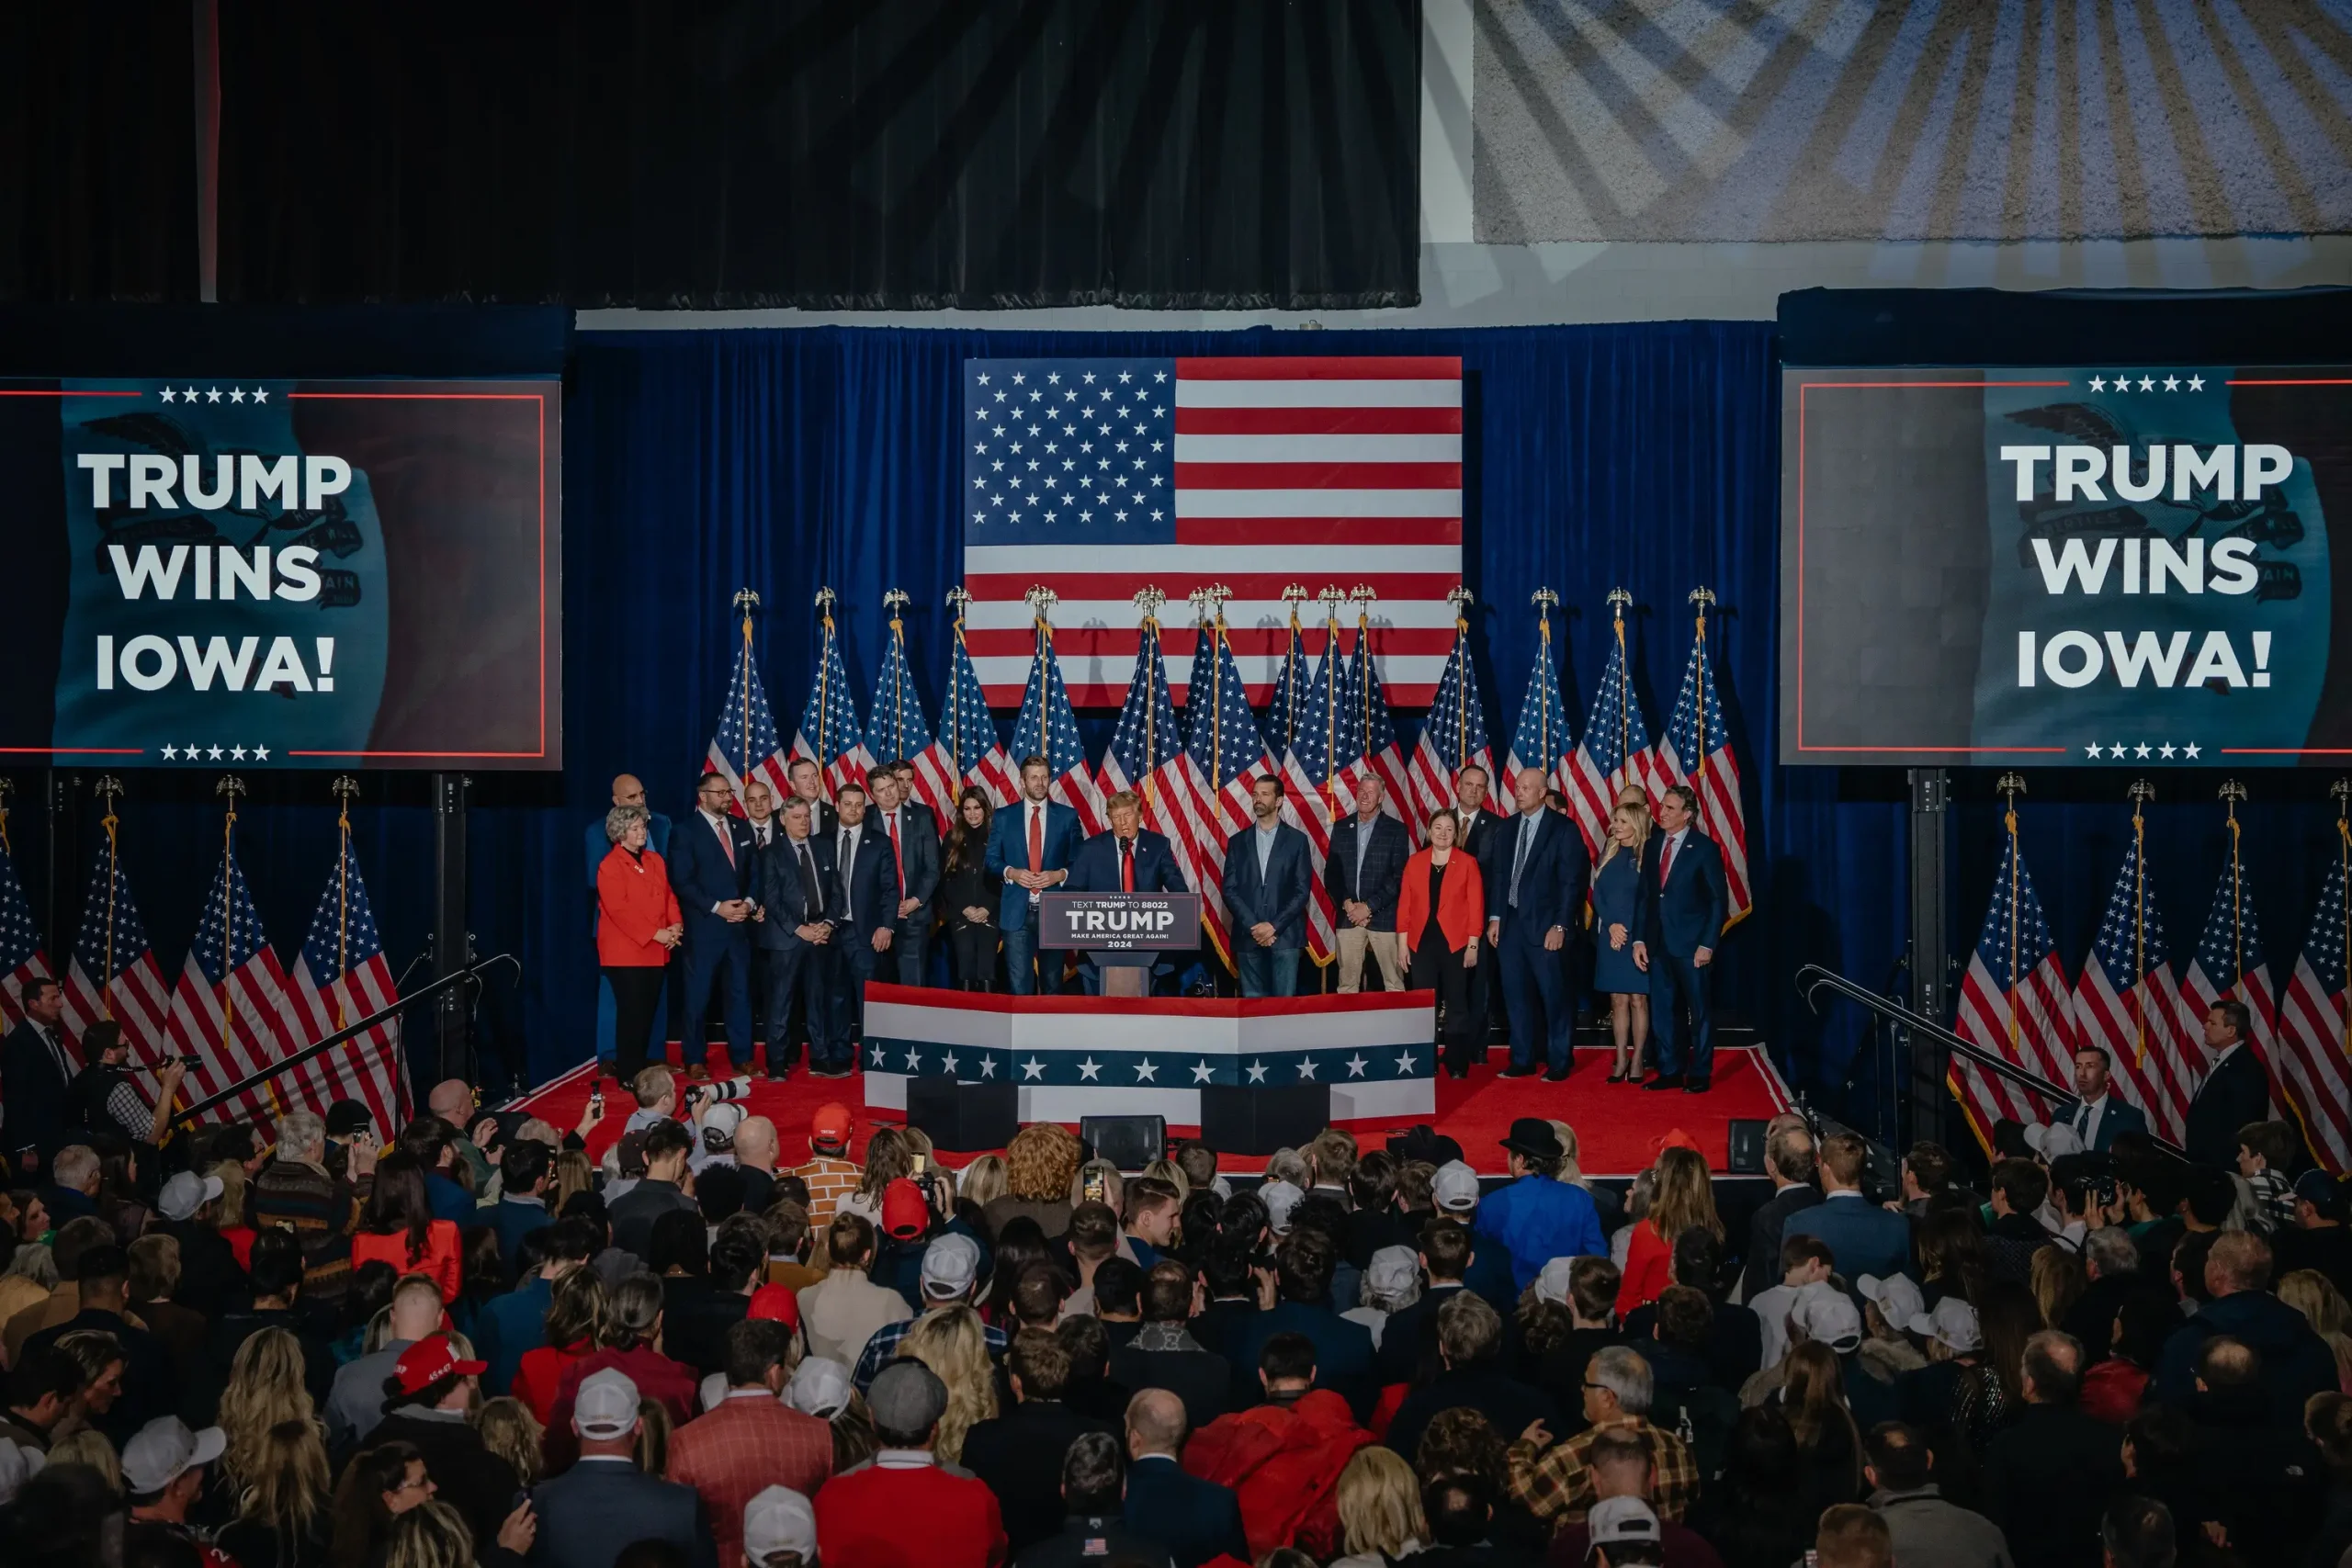 Donald Trump at a 2024 campaign rally, addressing a large crowd with American flags.